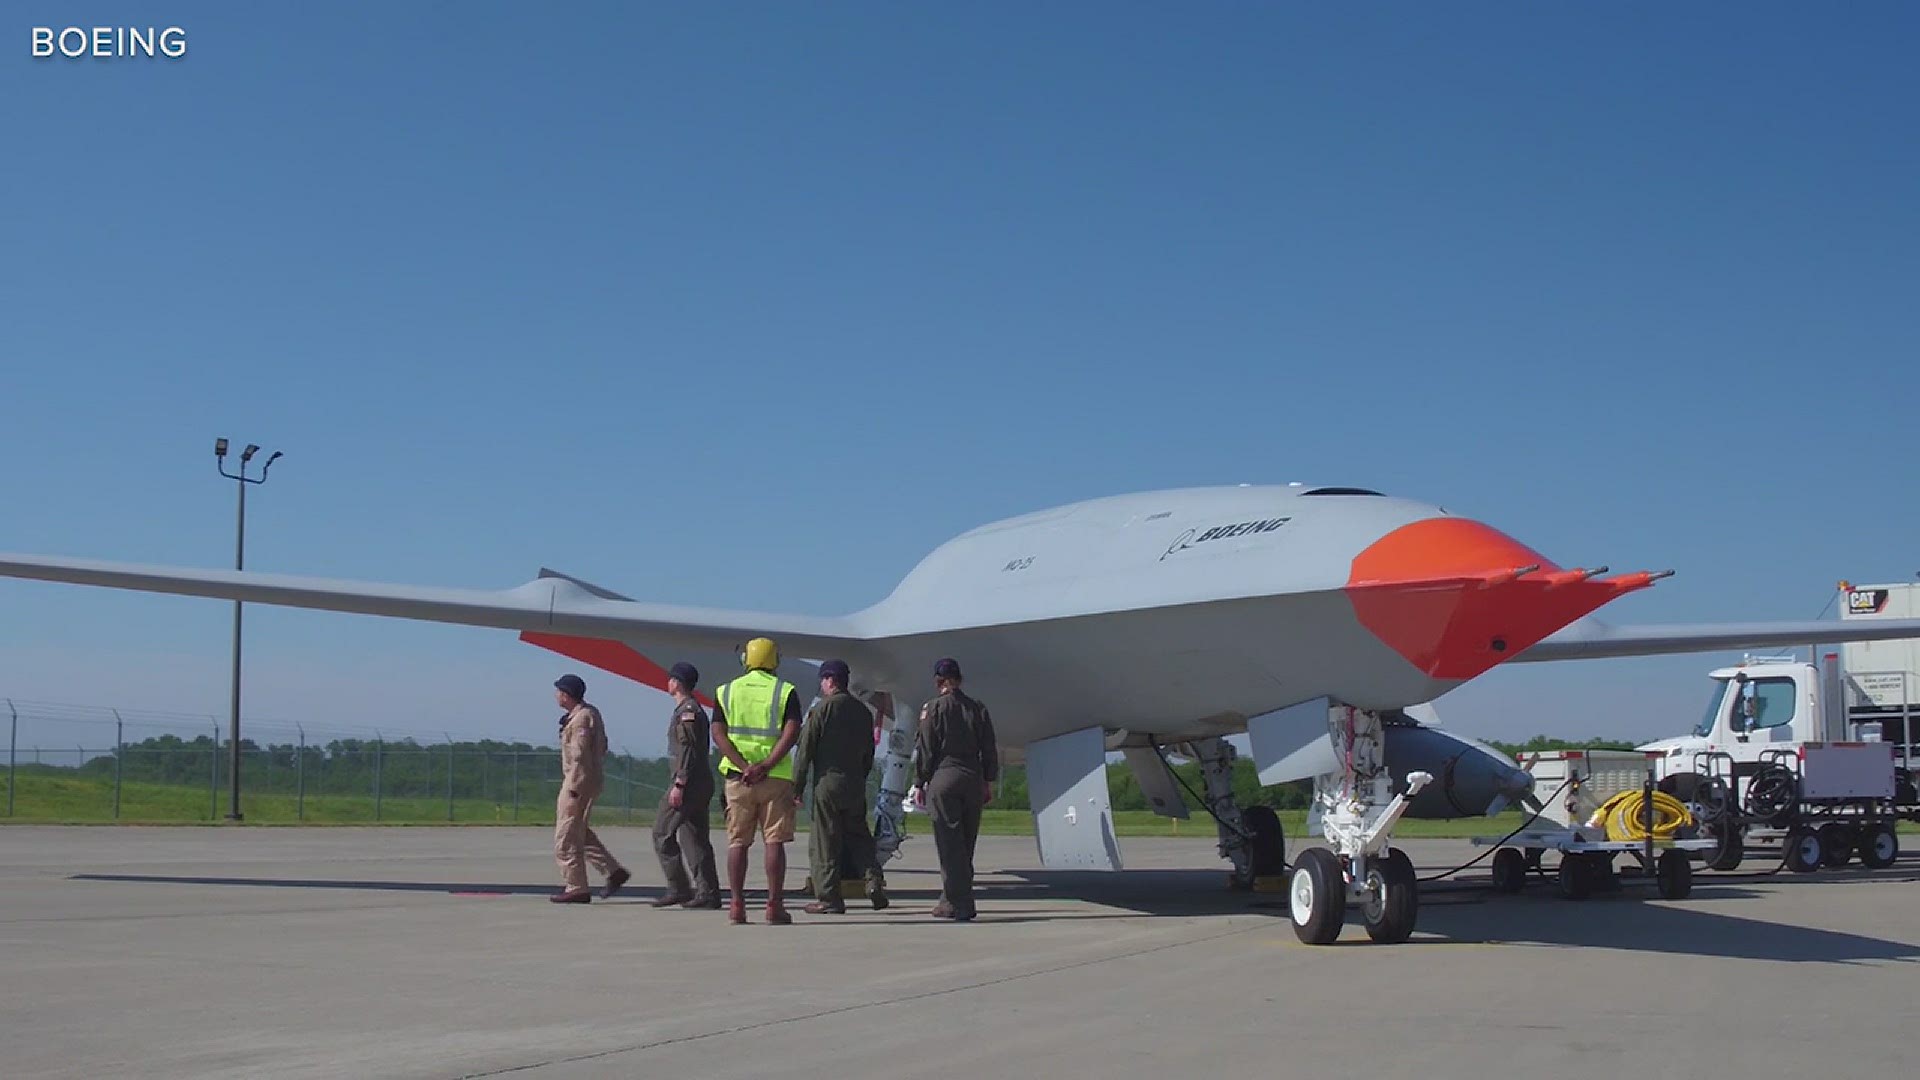 A Boeing MQ-25 T1 Stingray test tanker, unmanned, refueled a Navy F/A-18 Super Hornet for the first time, June 4, 2021.